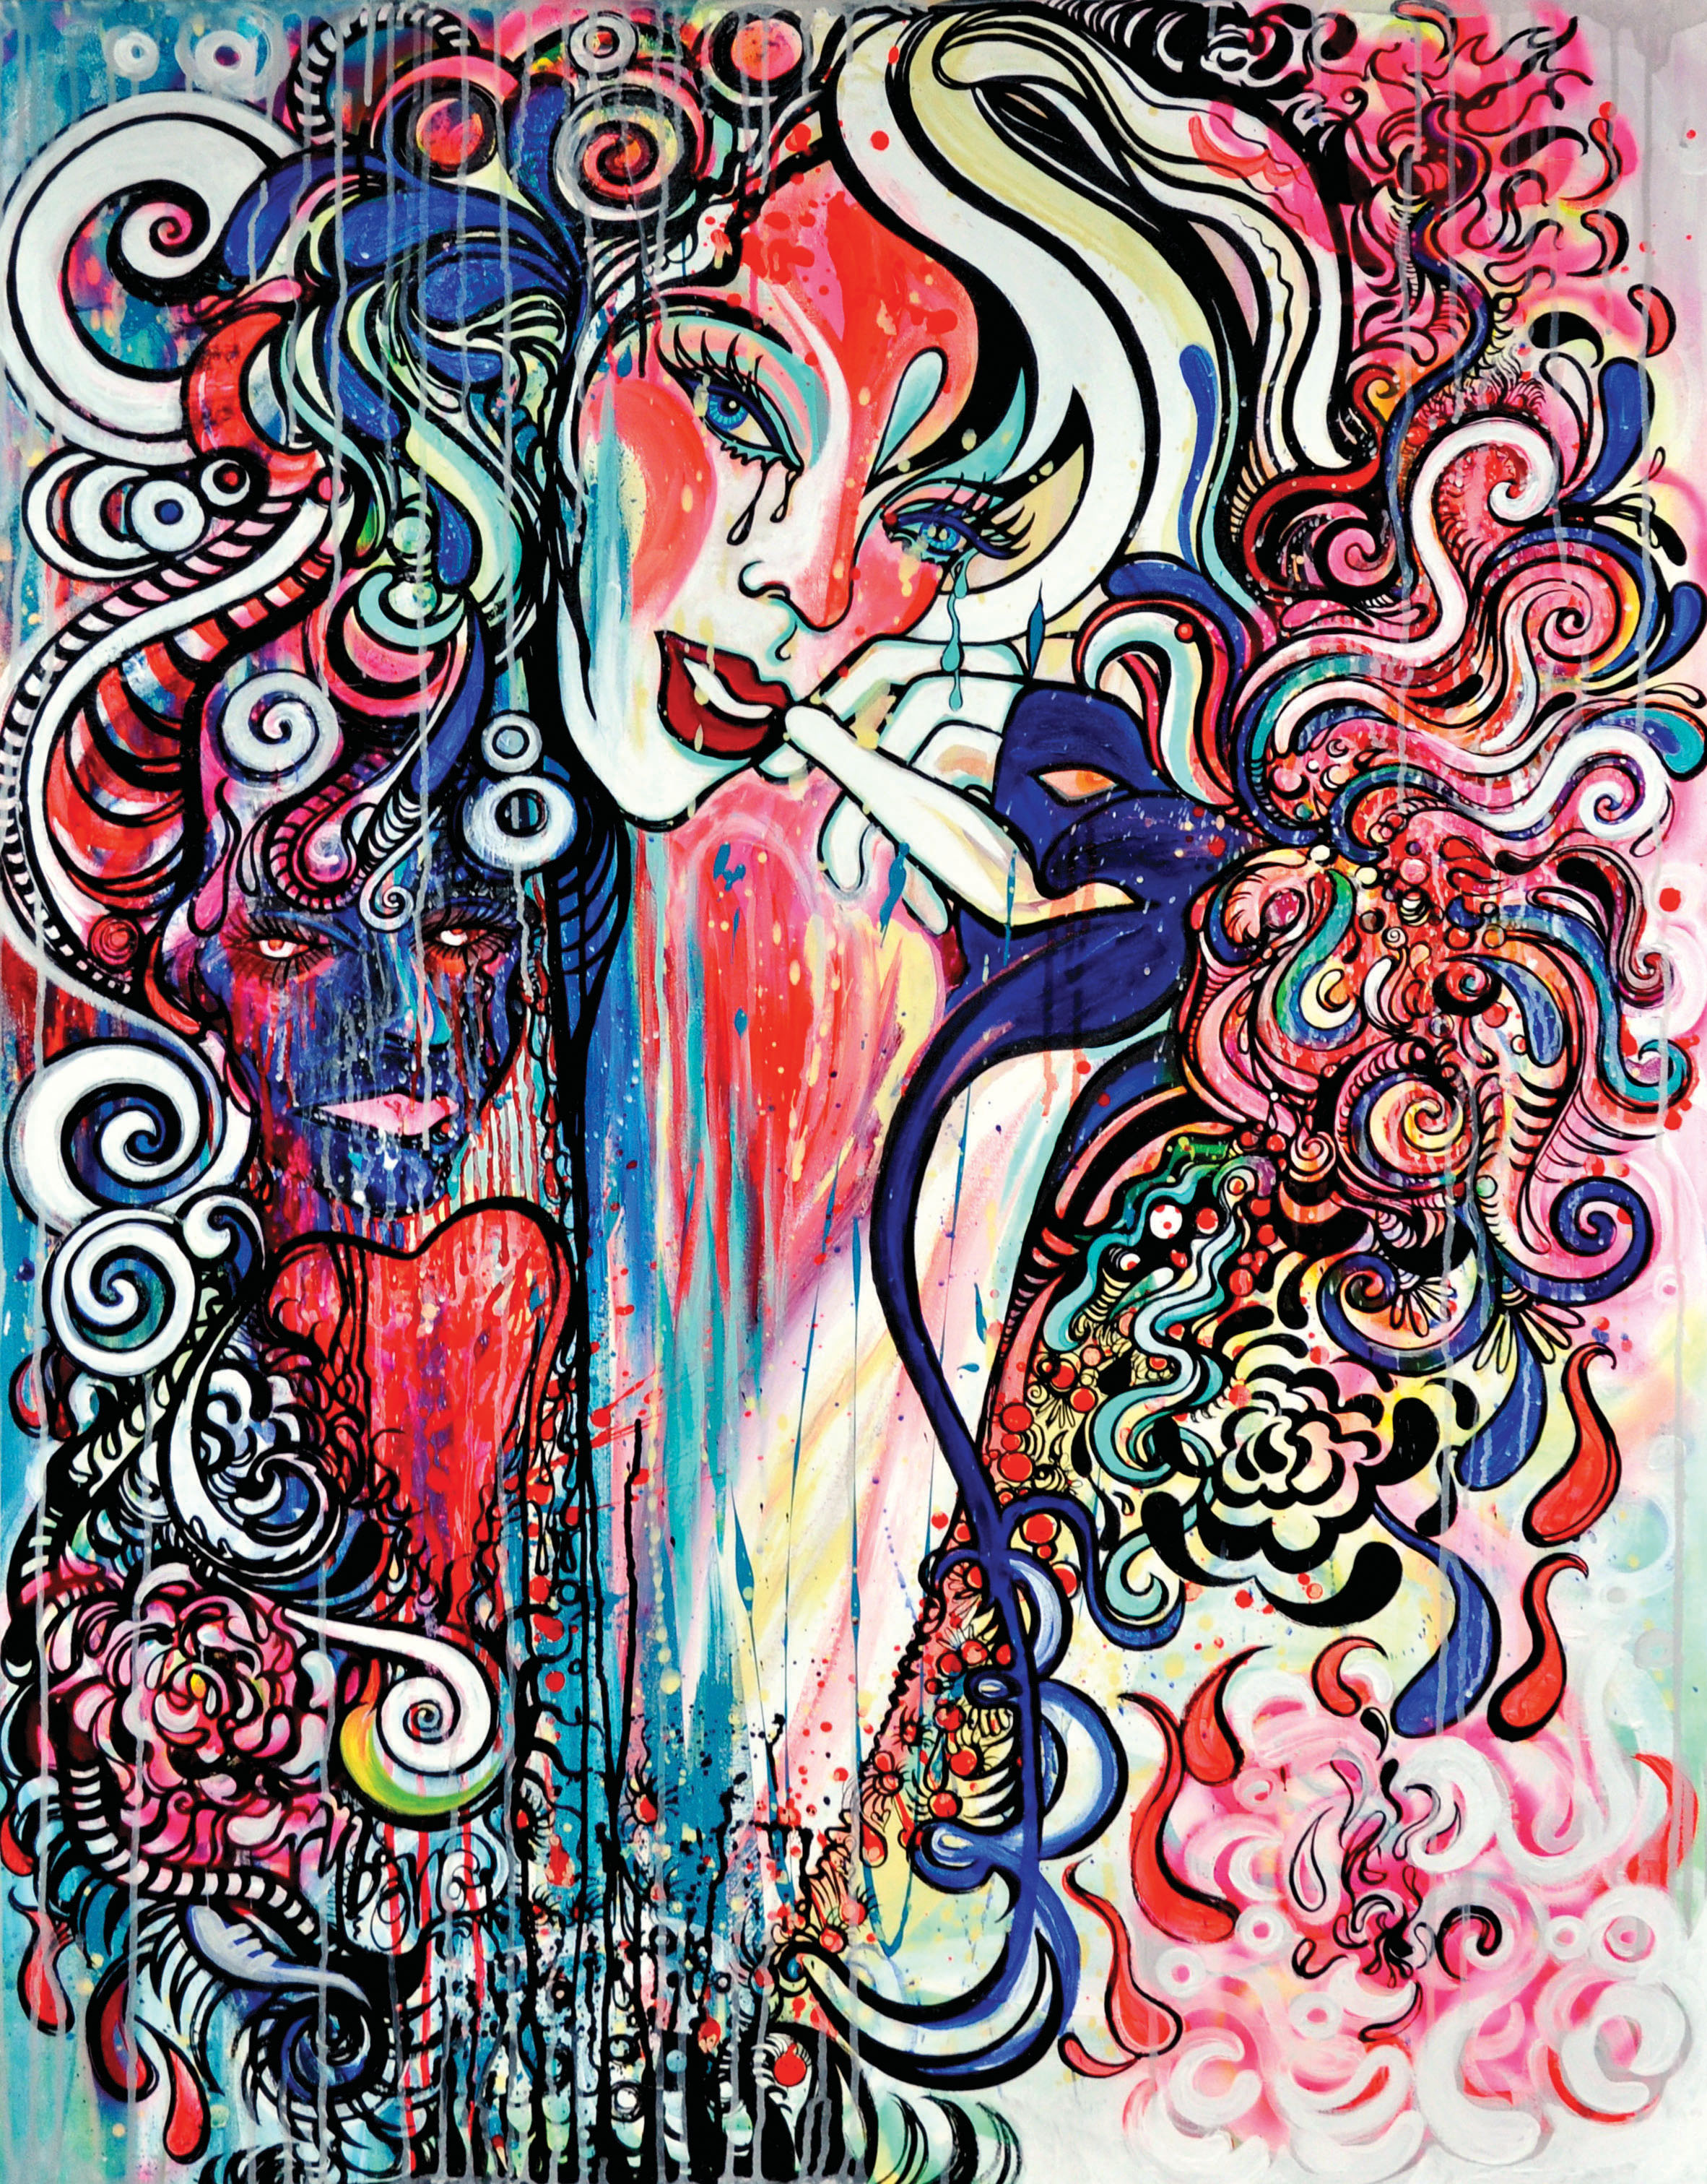  Love, Ink and Gouache on Canvas, 4’x5’, 2010 